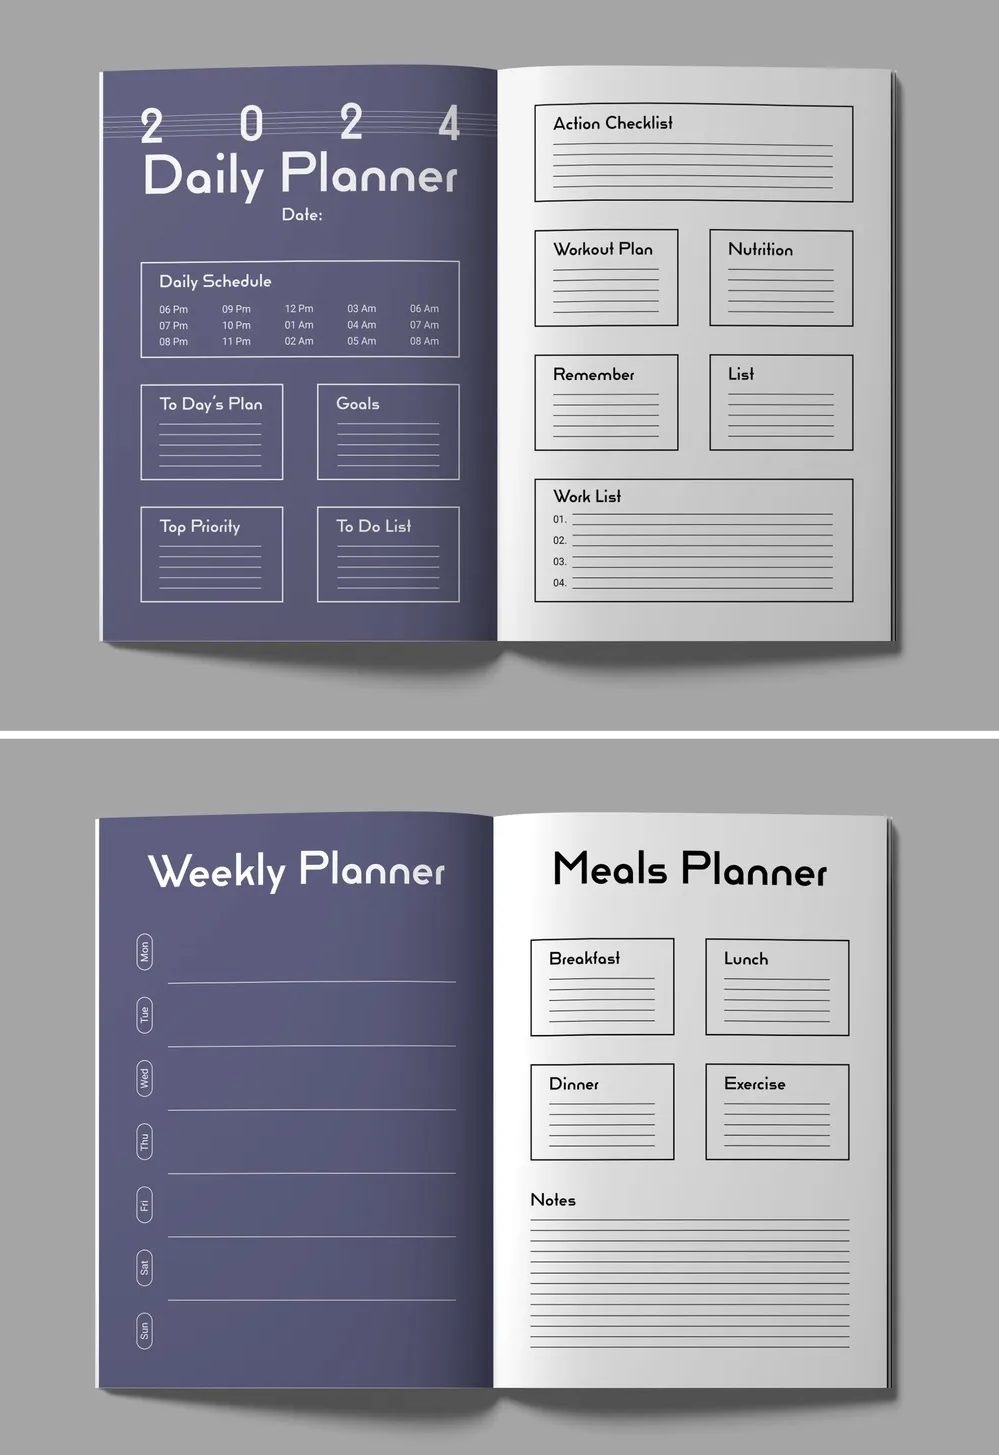 Adobestock - Daily Planner Layout 722994843